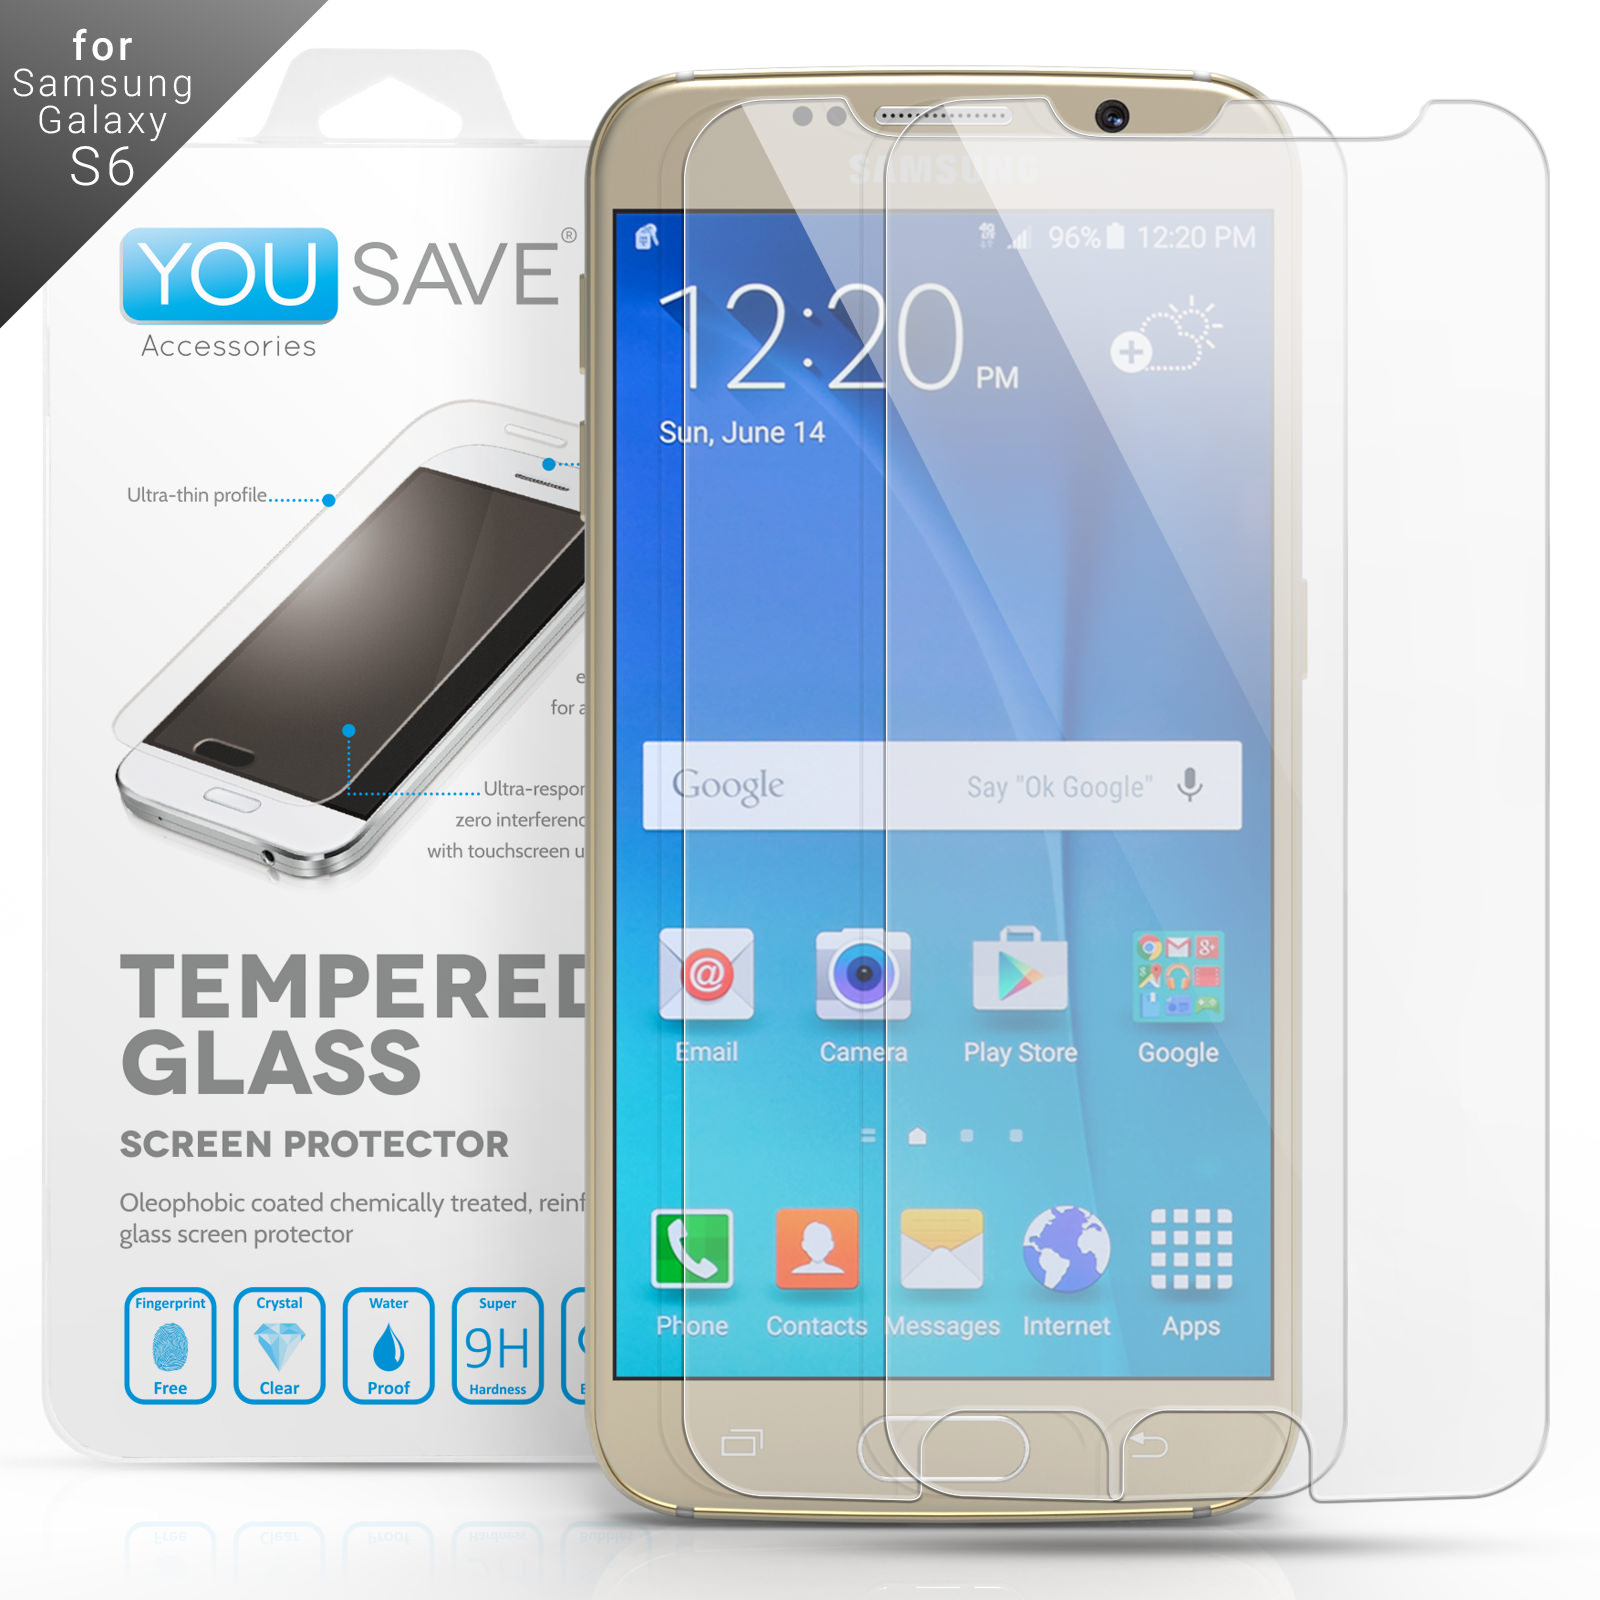 Yousave Accessories Samsung Galaxy S6 Glass Screen Protector - Twin Pack